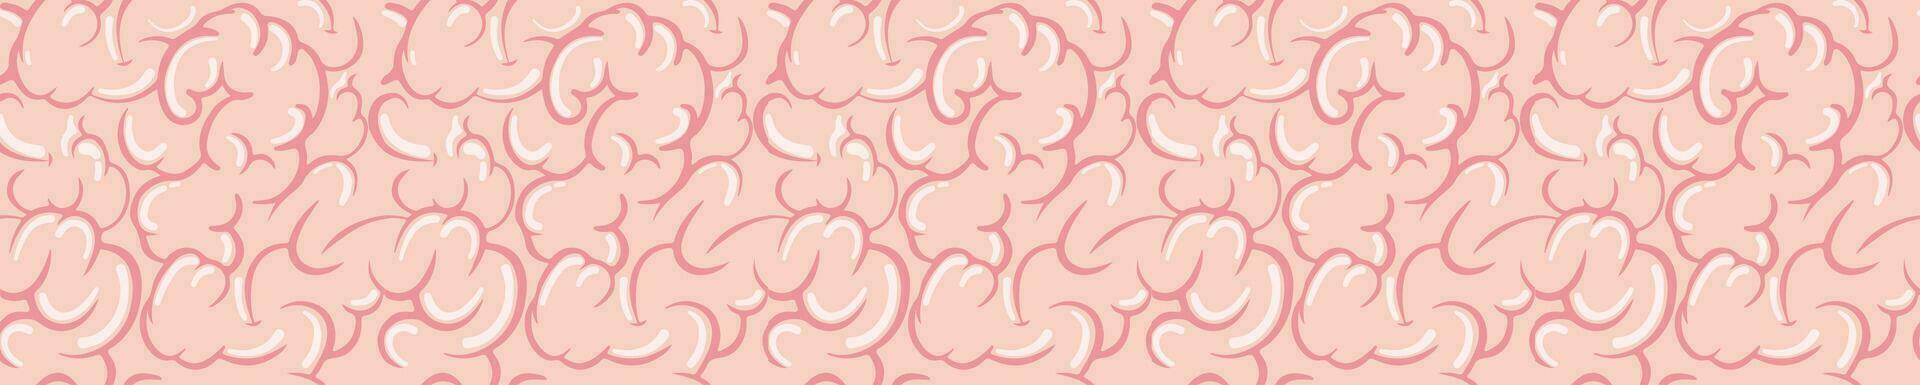 Brain pink gyri seamless pattern. Thinking and mental processes with creative ideas emotional stress and burnout vector emotions